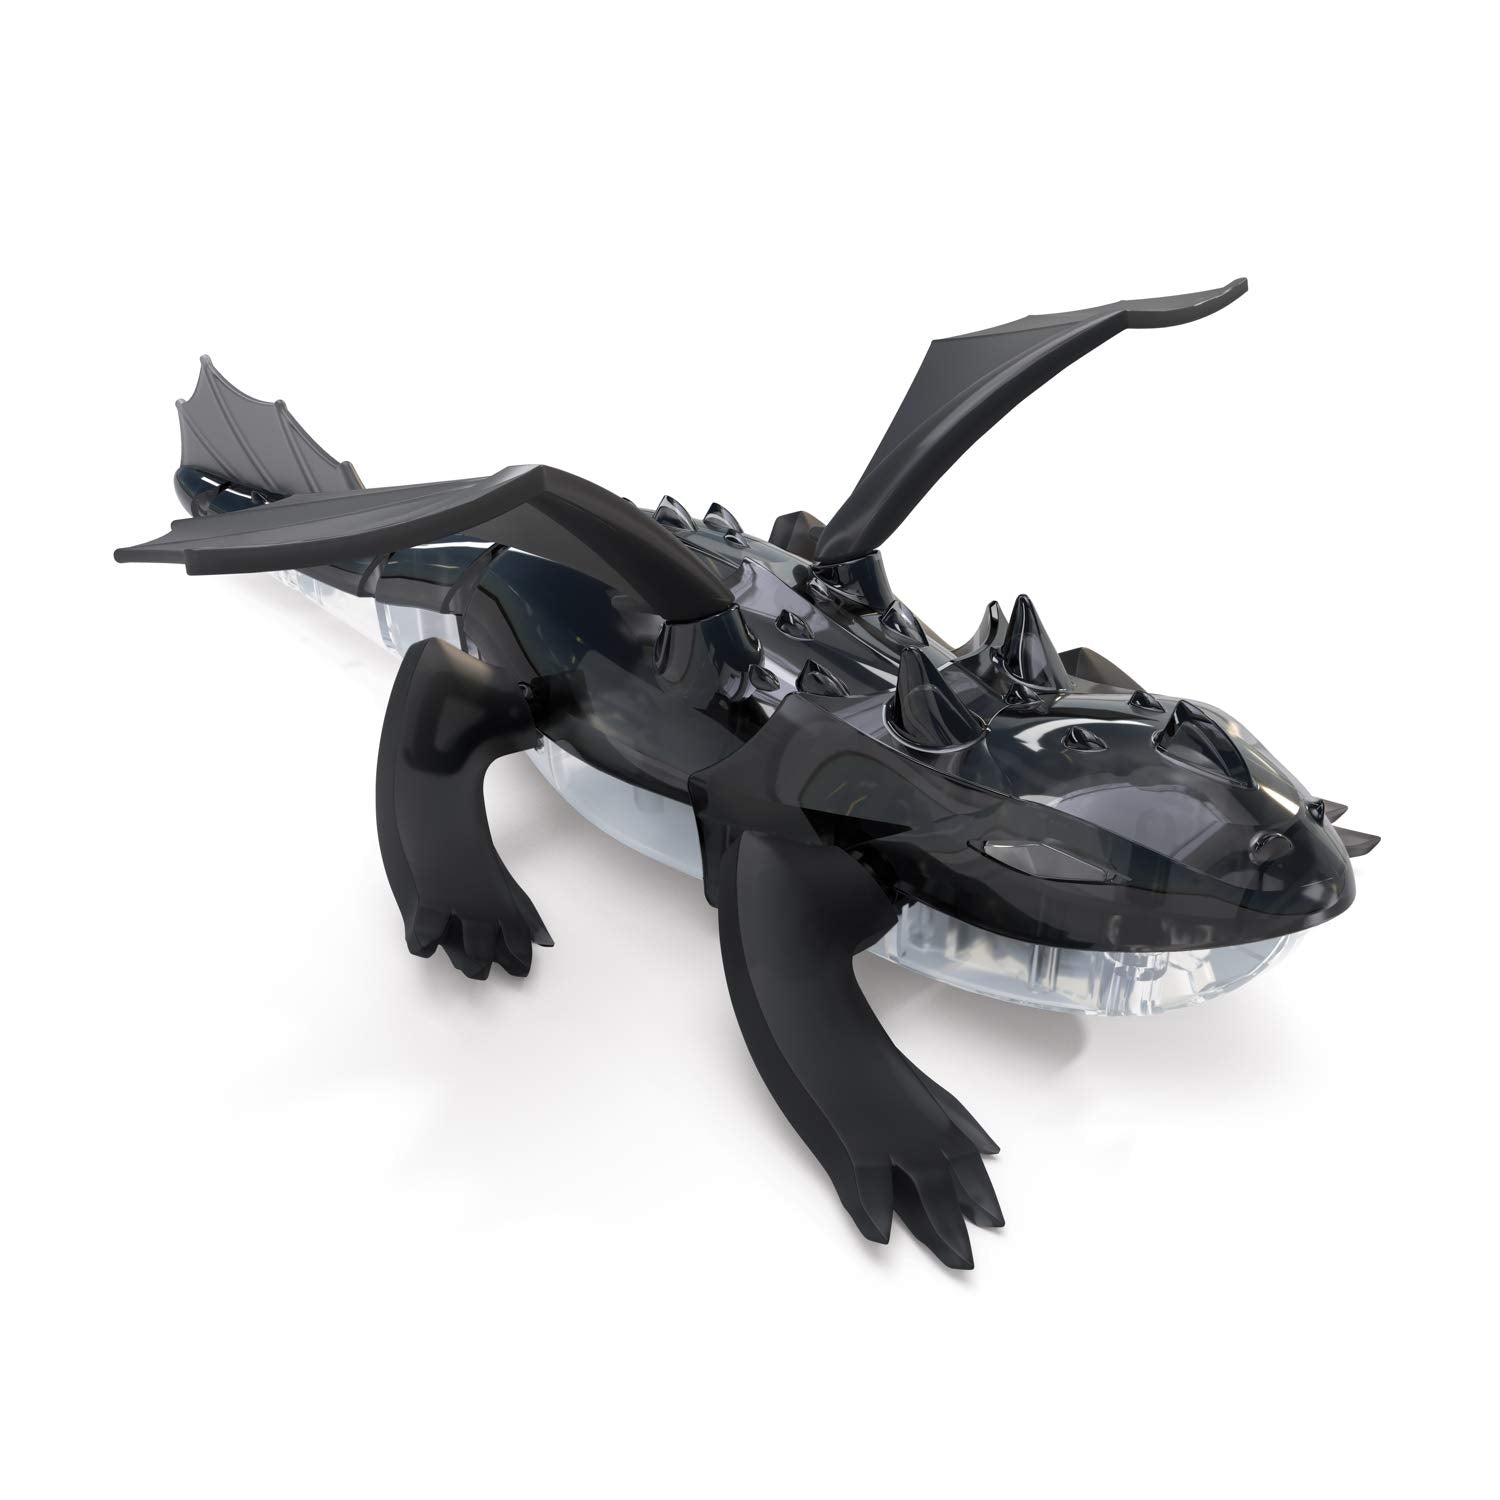 HEXBUG Remote Control Dragon - Rechargeable Toy for Kids - Adjustable Robotic Dinosaur Figure - Colors May Vary